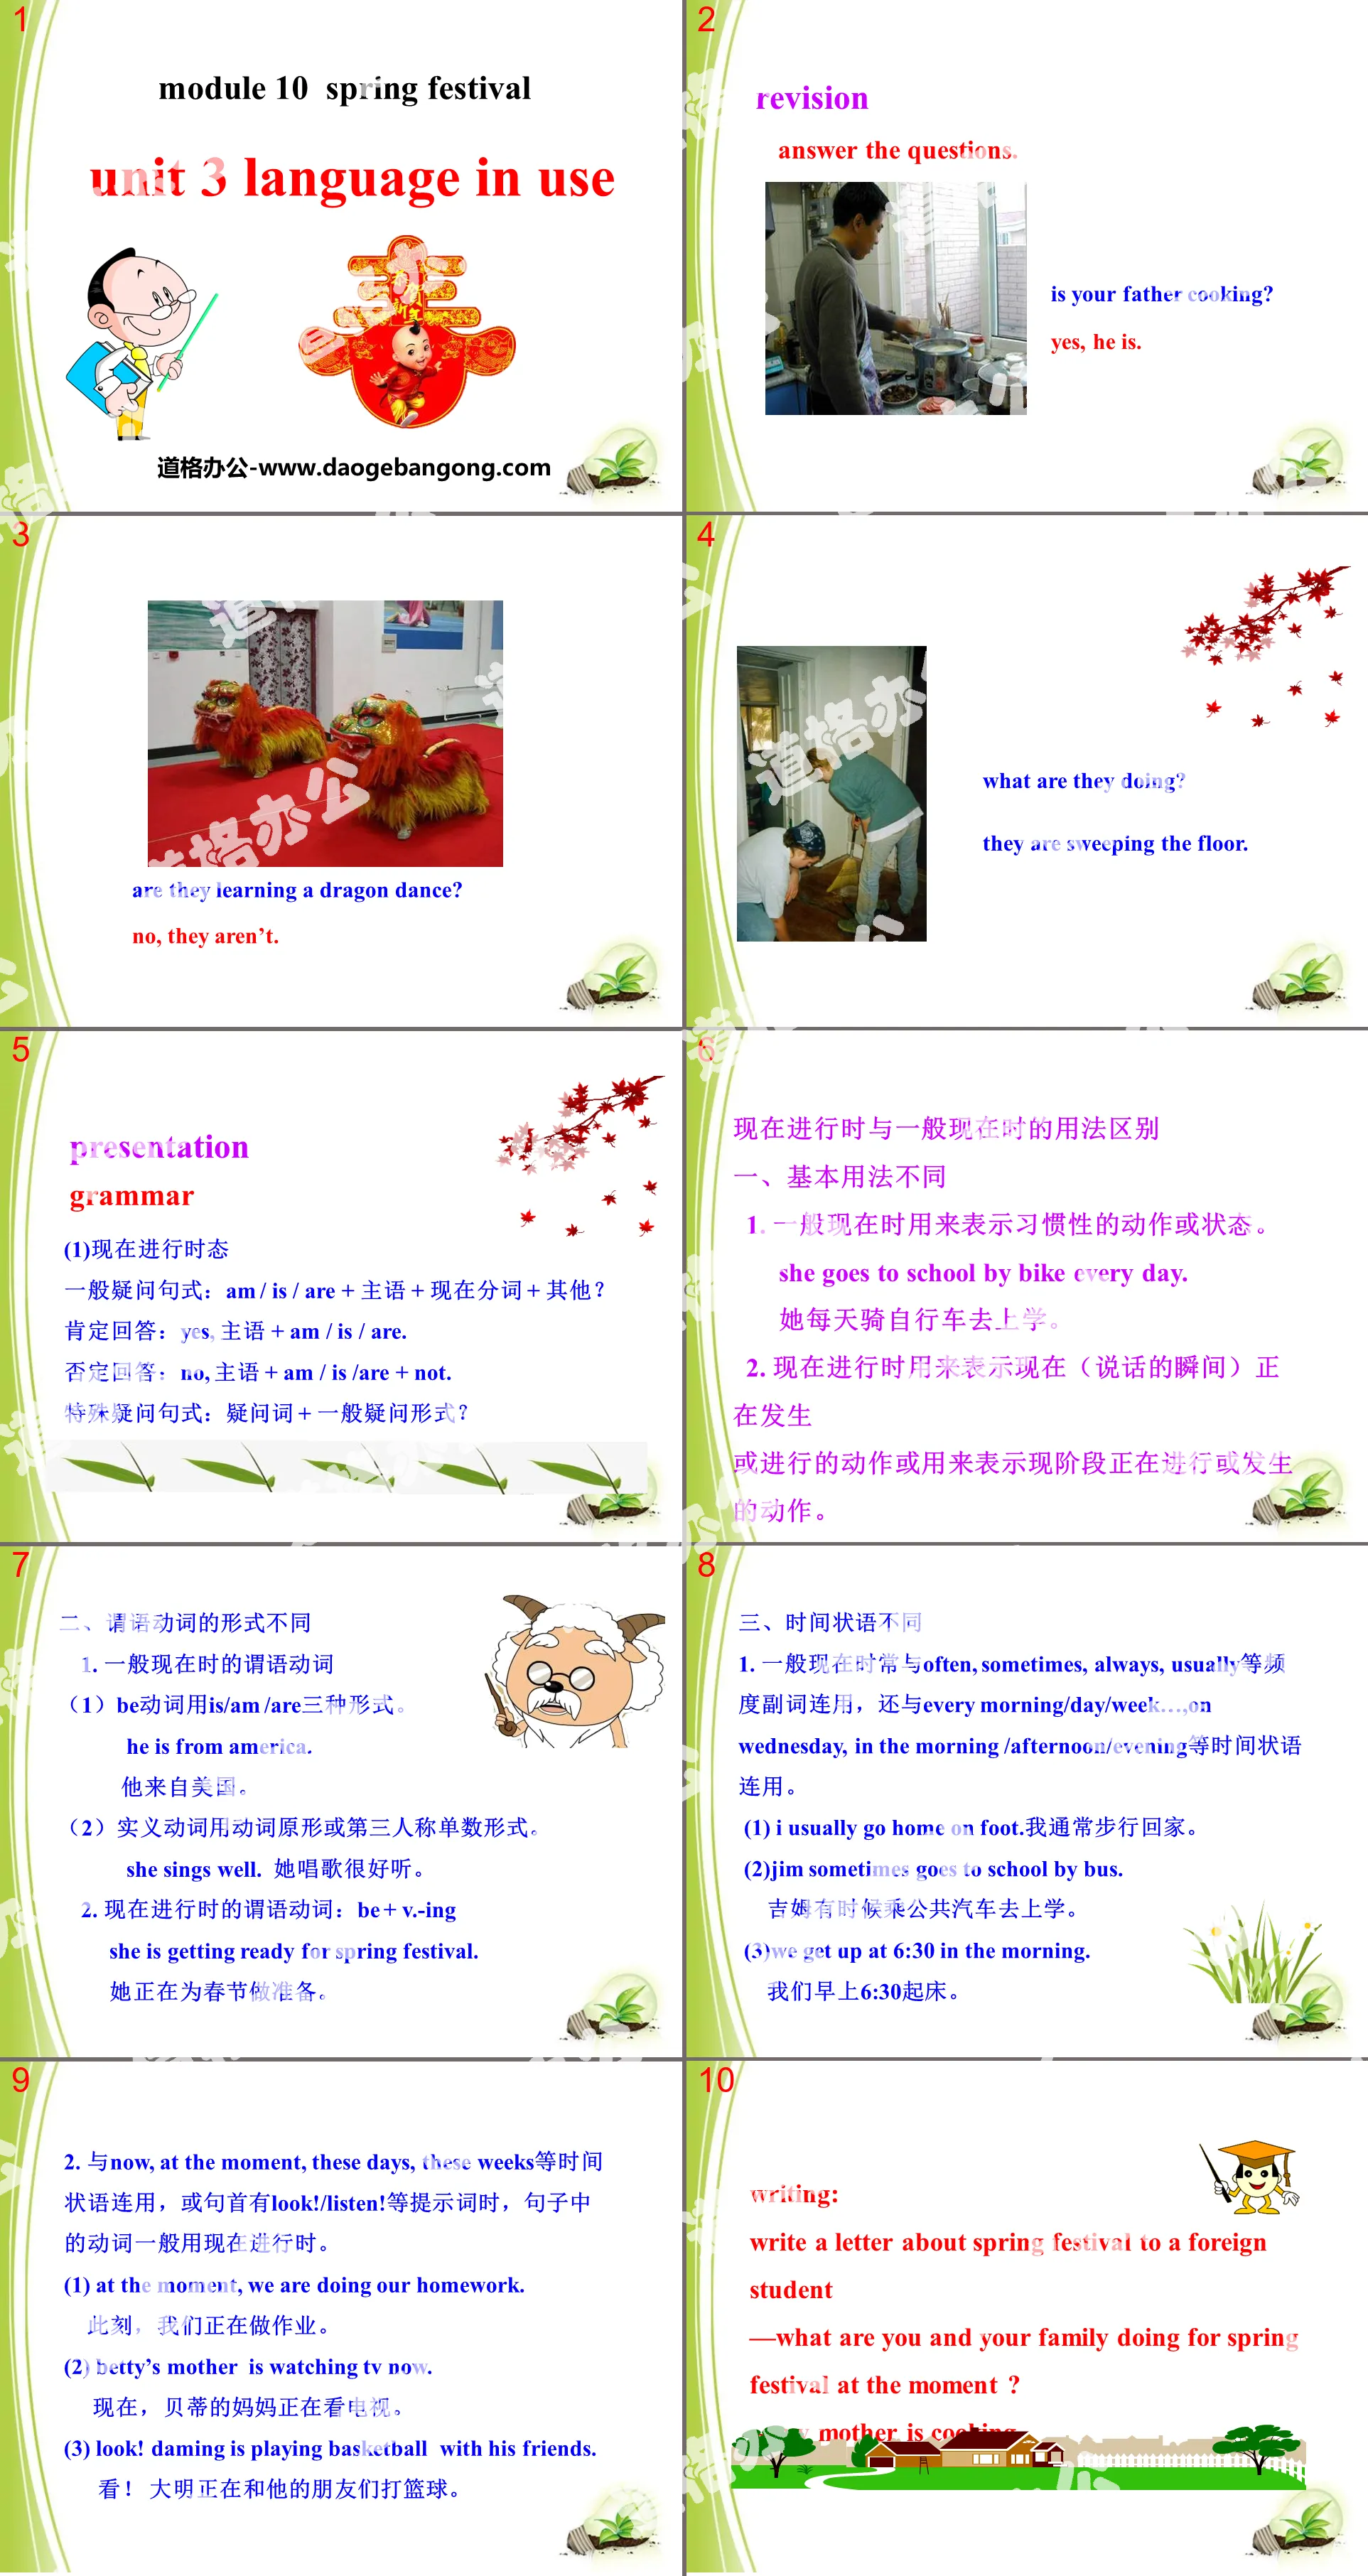 "Language in use" Spring Festival PPT courseware 3